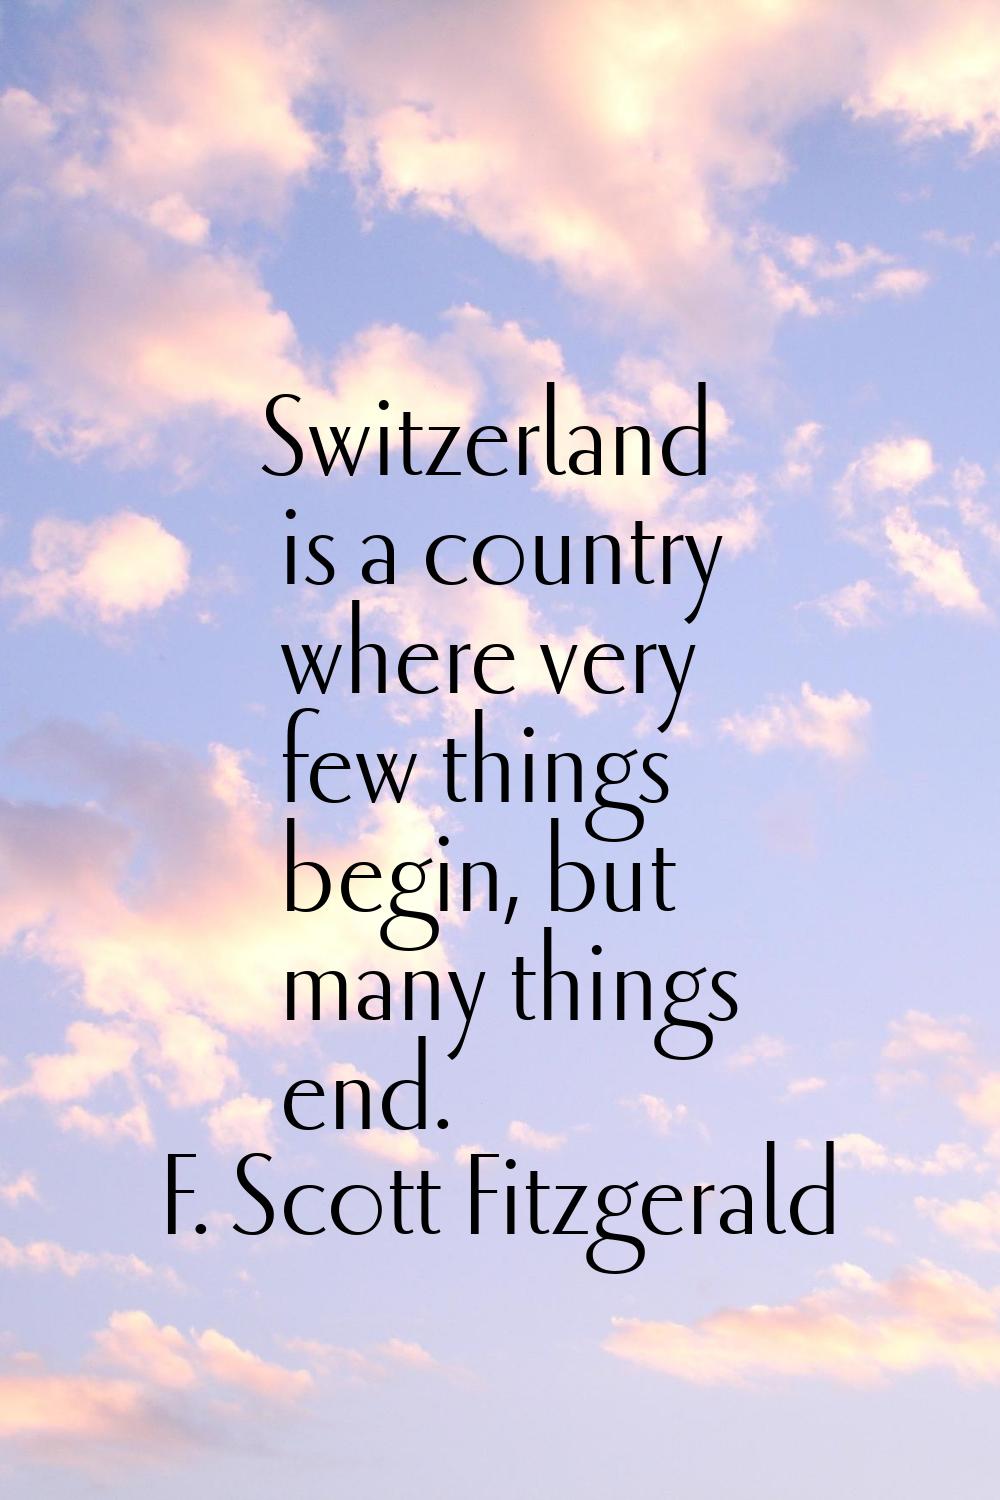 Switzerland is a country where very few things begin, but many things end.